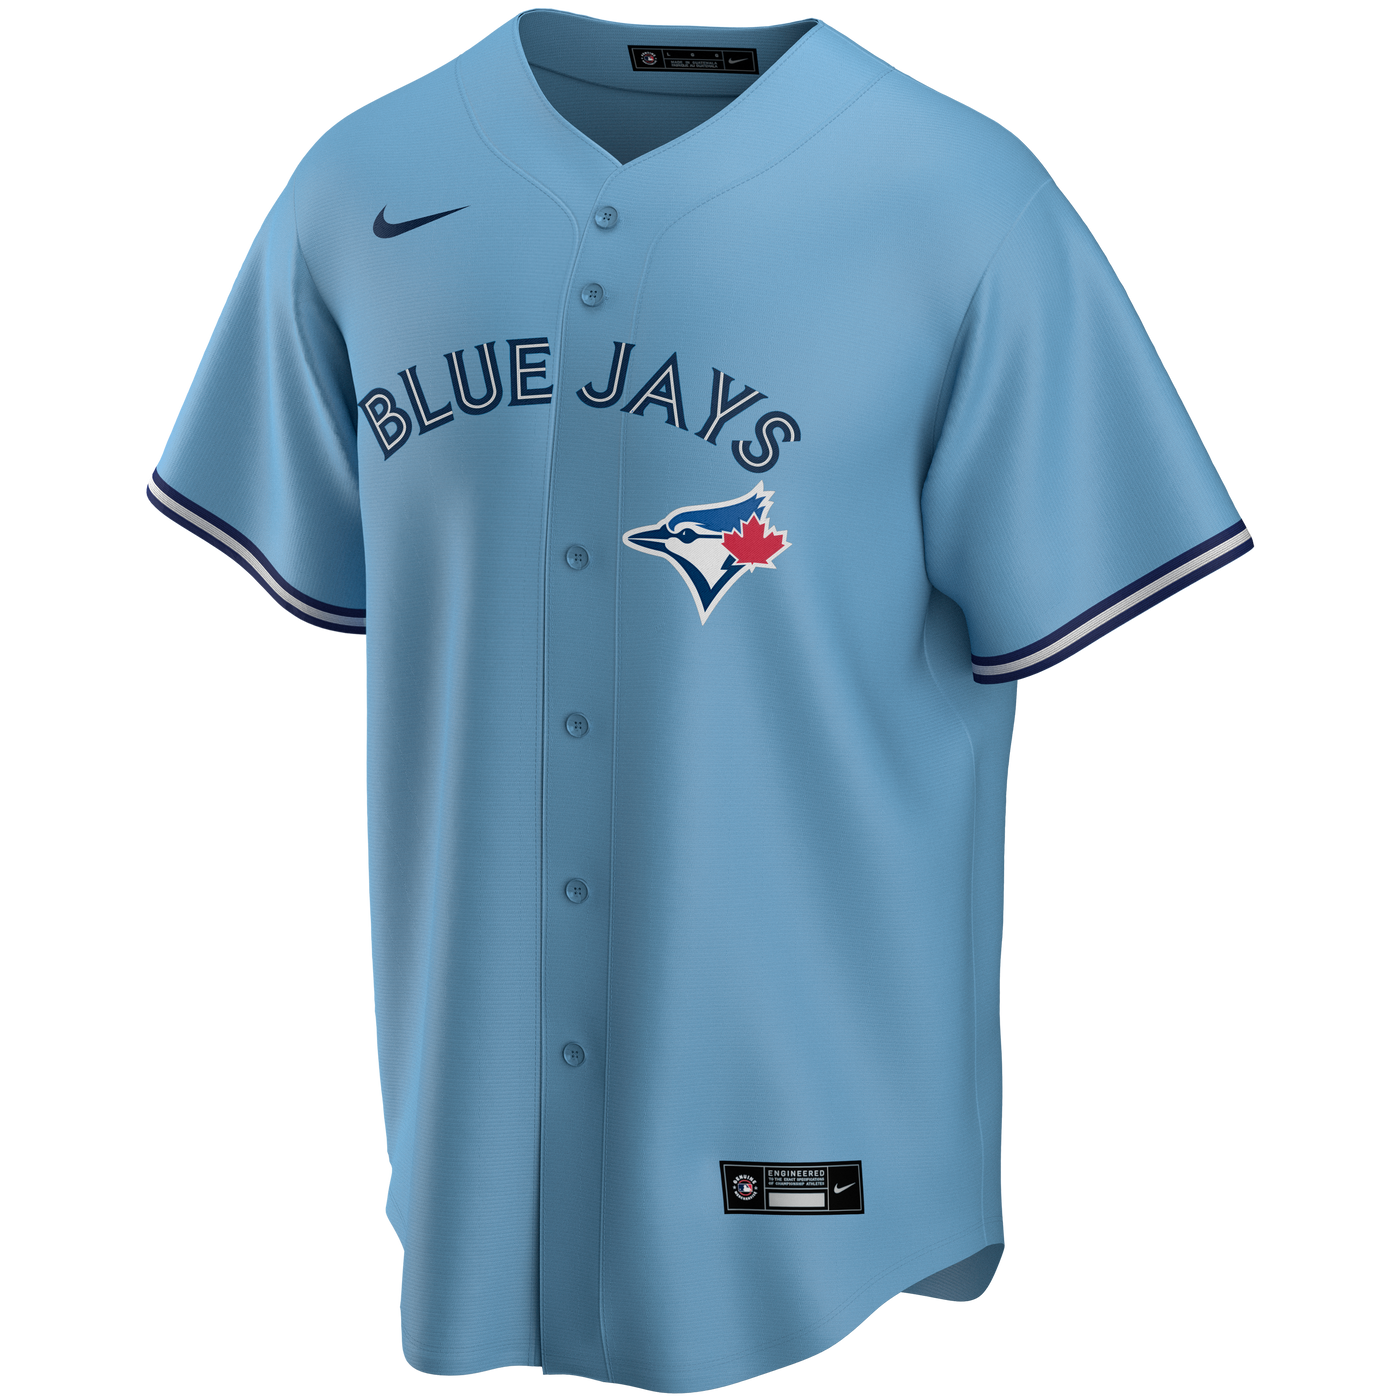 TORONTO BLUE JAYS 1970's Majestic Cooperstown Away Jersey Customized Any  Name & Number(s) - Custom Throwback Jerseys